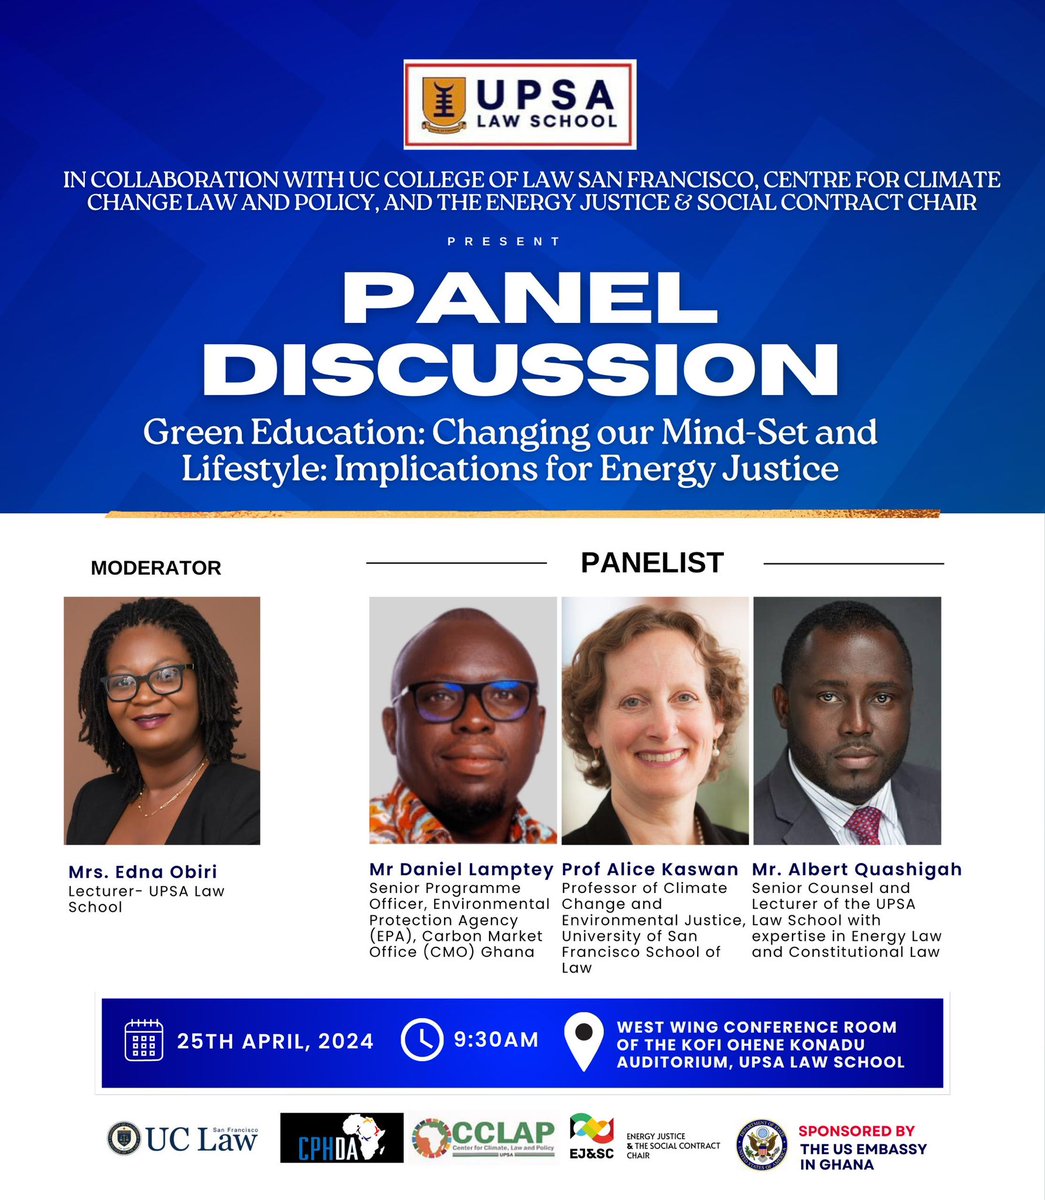 Join us at 9:30am for this insightful discussion geared towards promoting and protecting the quality of our environment.

More details on flier…

#UPSA #UPSALawSchool #Environment #EnvironmentalLaw #ClimateChange #Energy